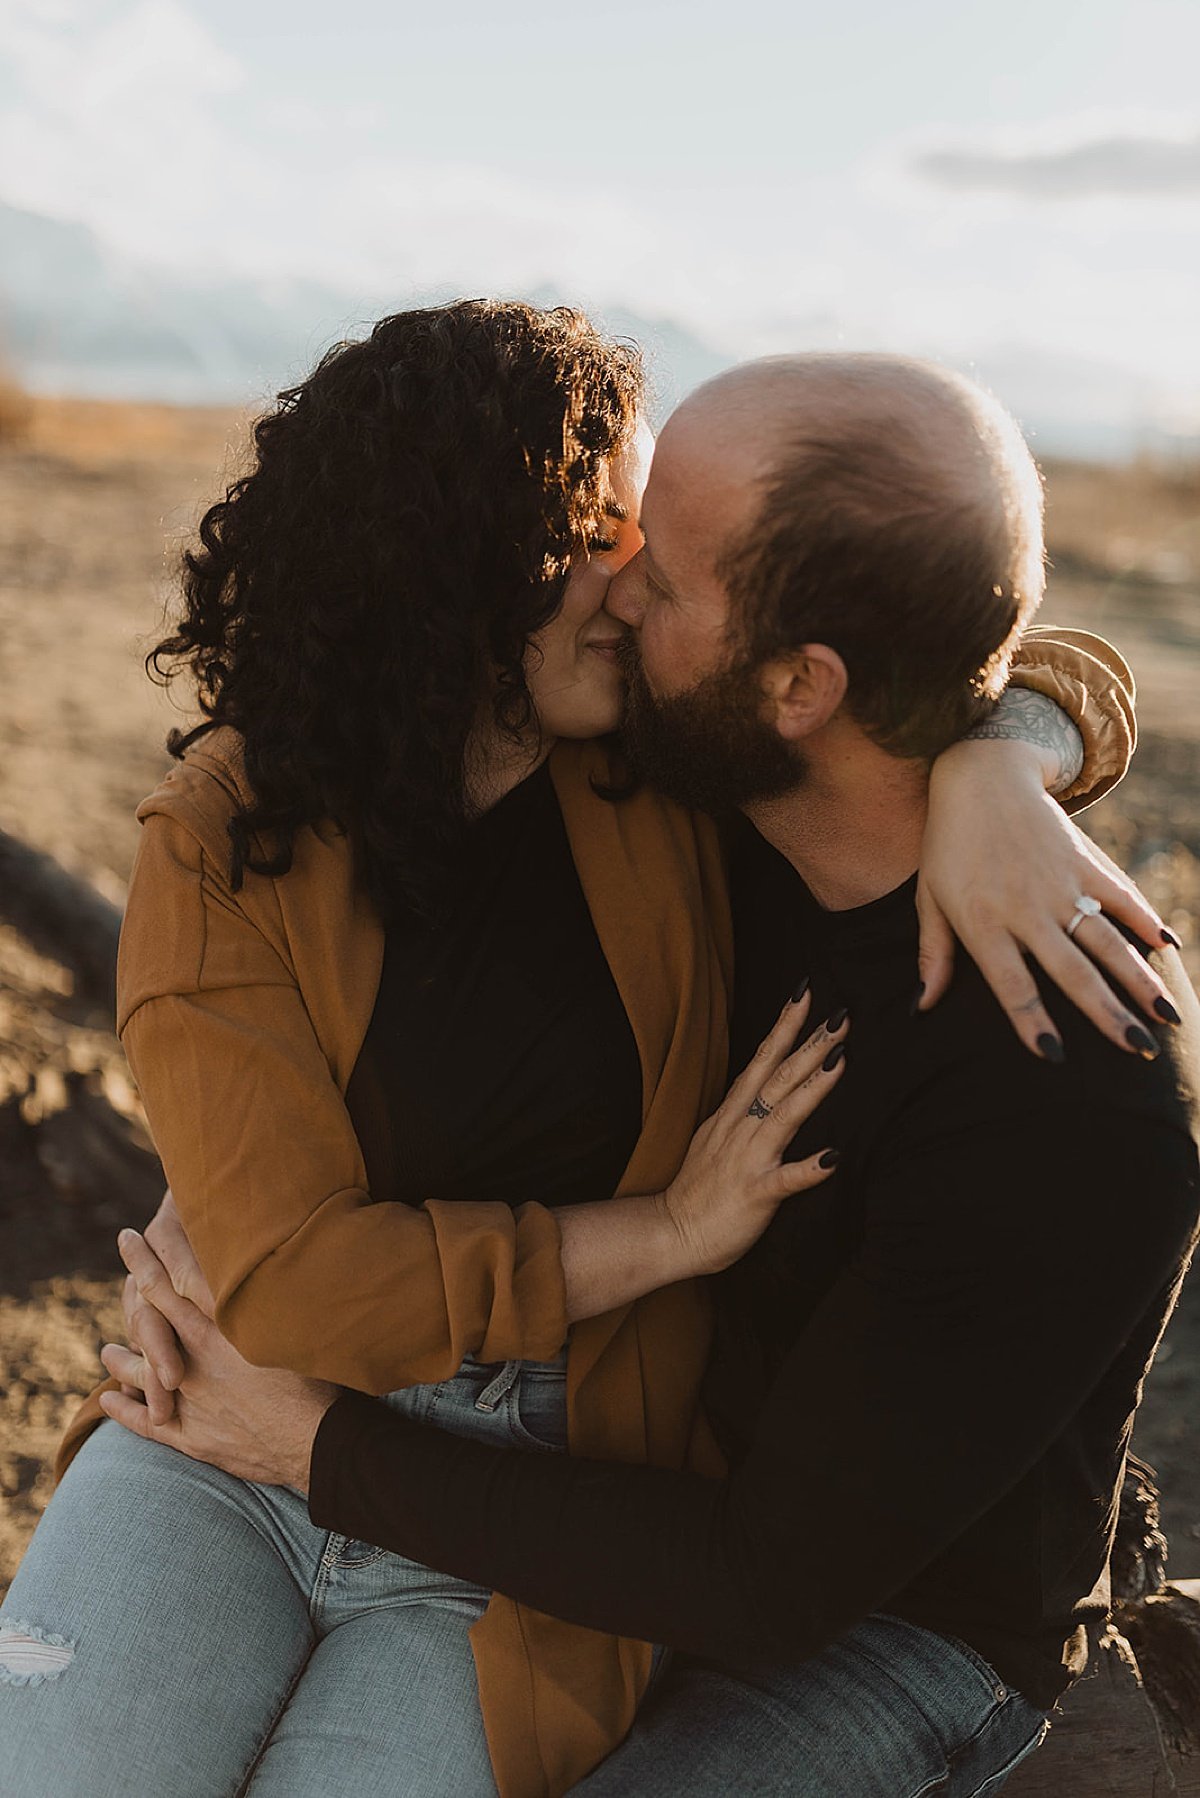  Newly engaged couple kiss in golden hour shoot by Theresa McDonald Photography 